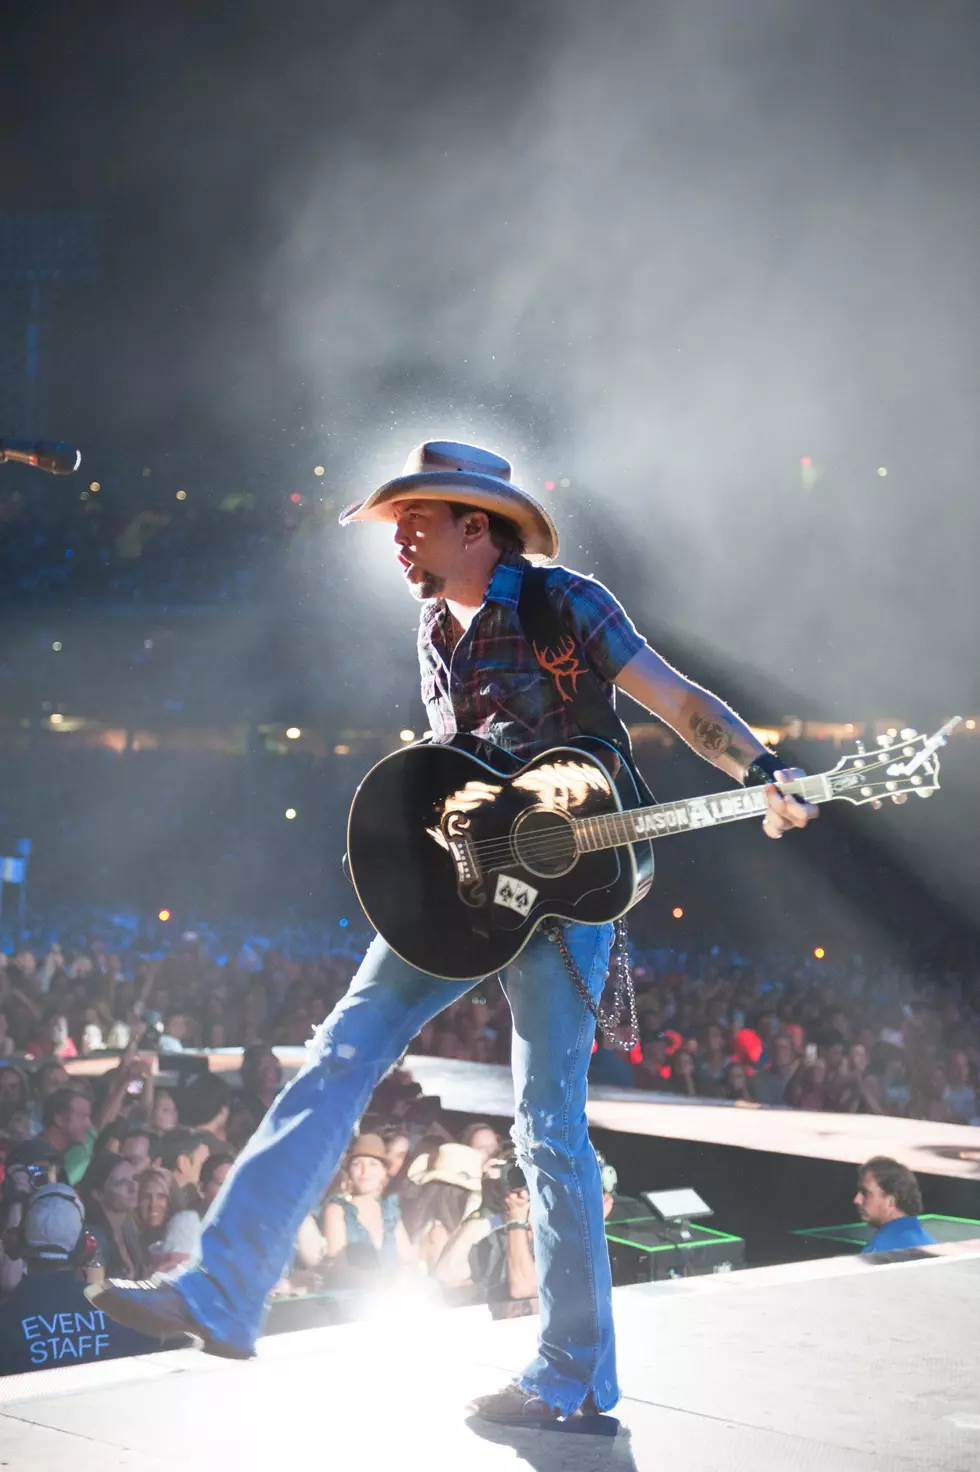 JUST ANNOUNCED…JASON ALDEAN AT PALACE!!!